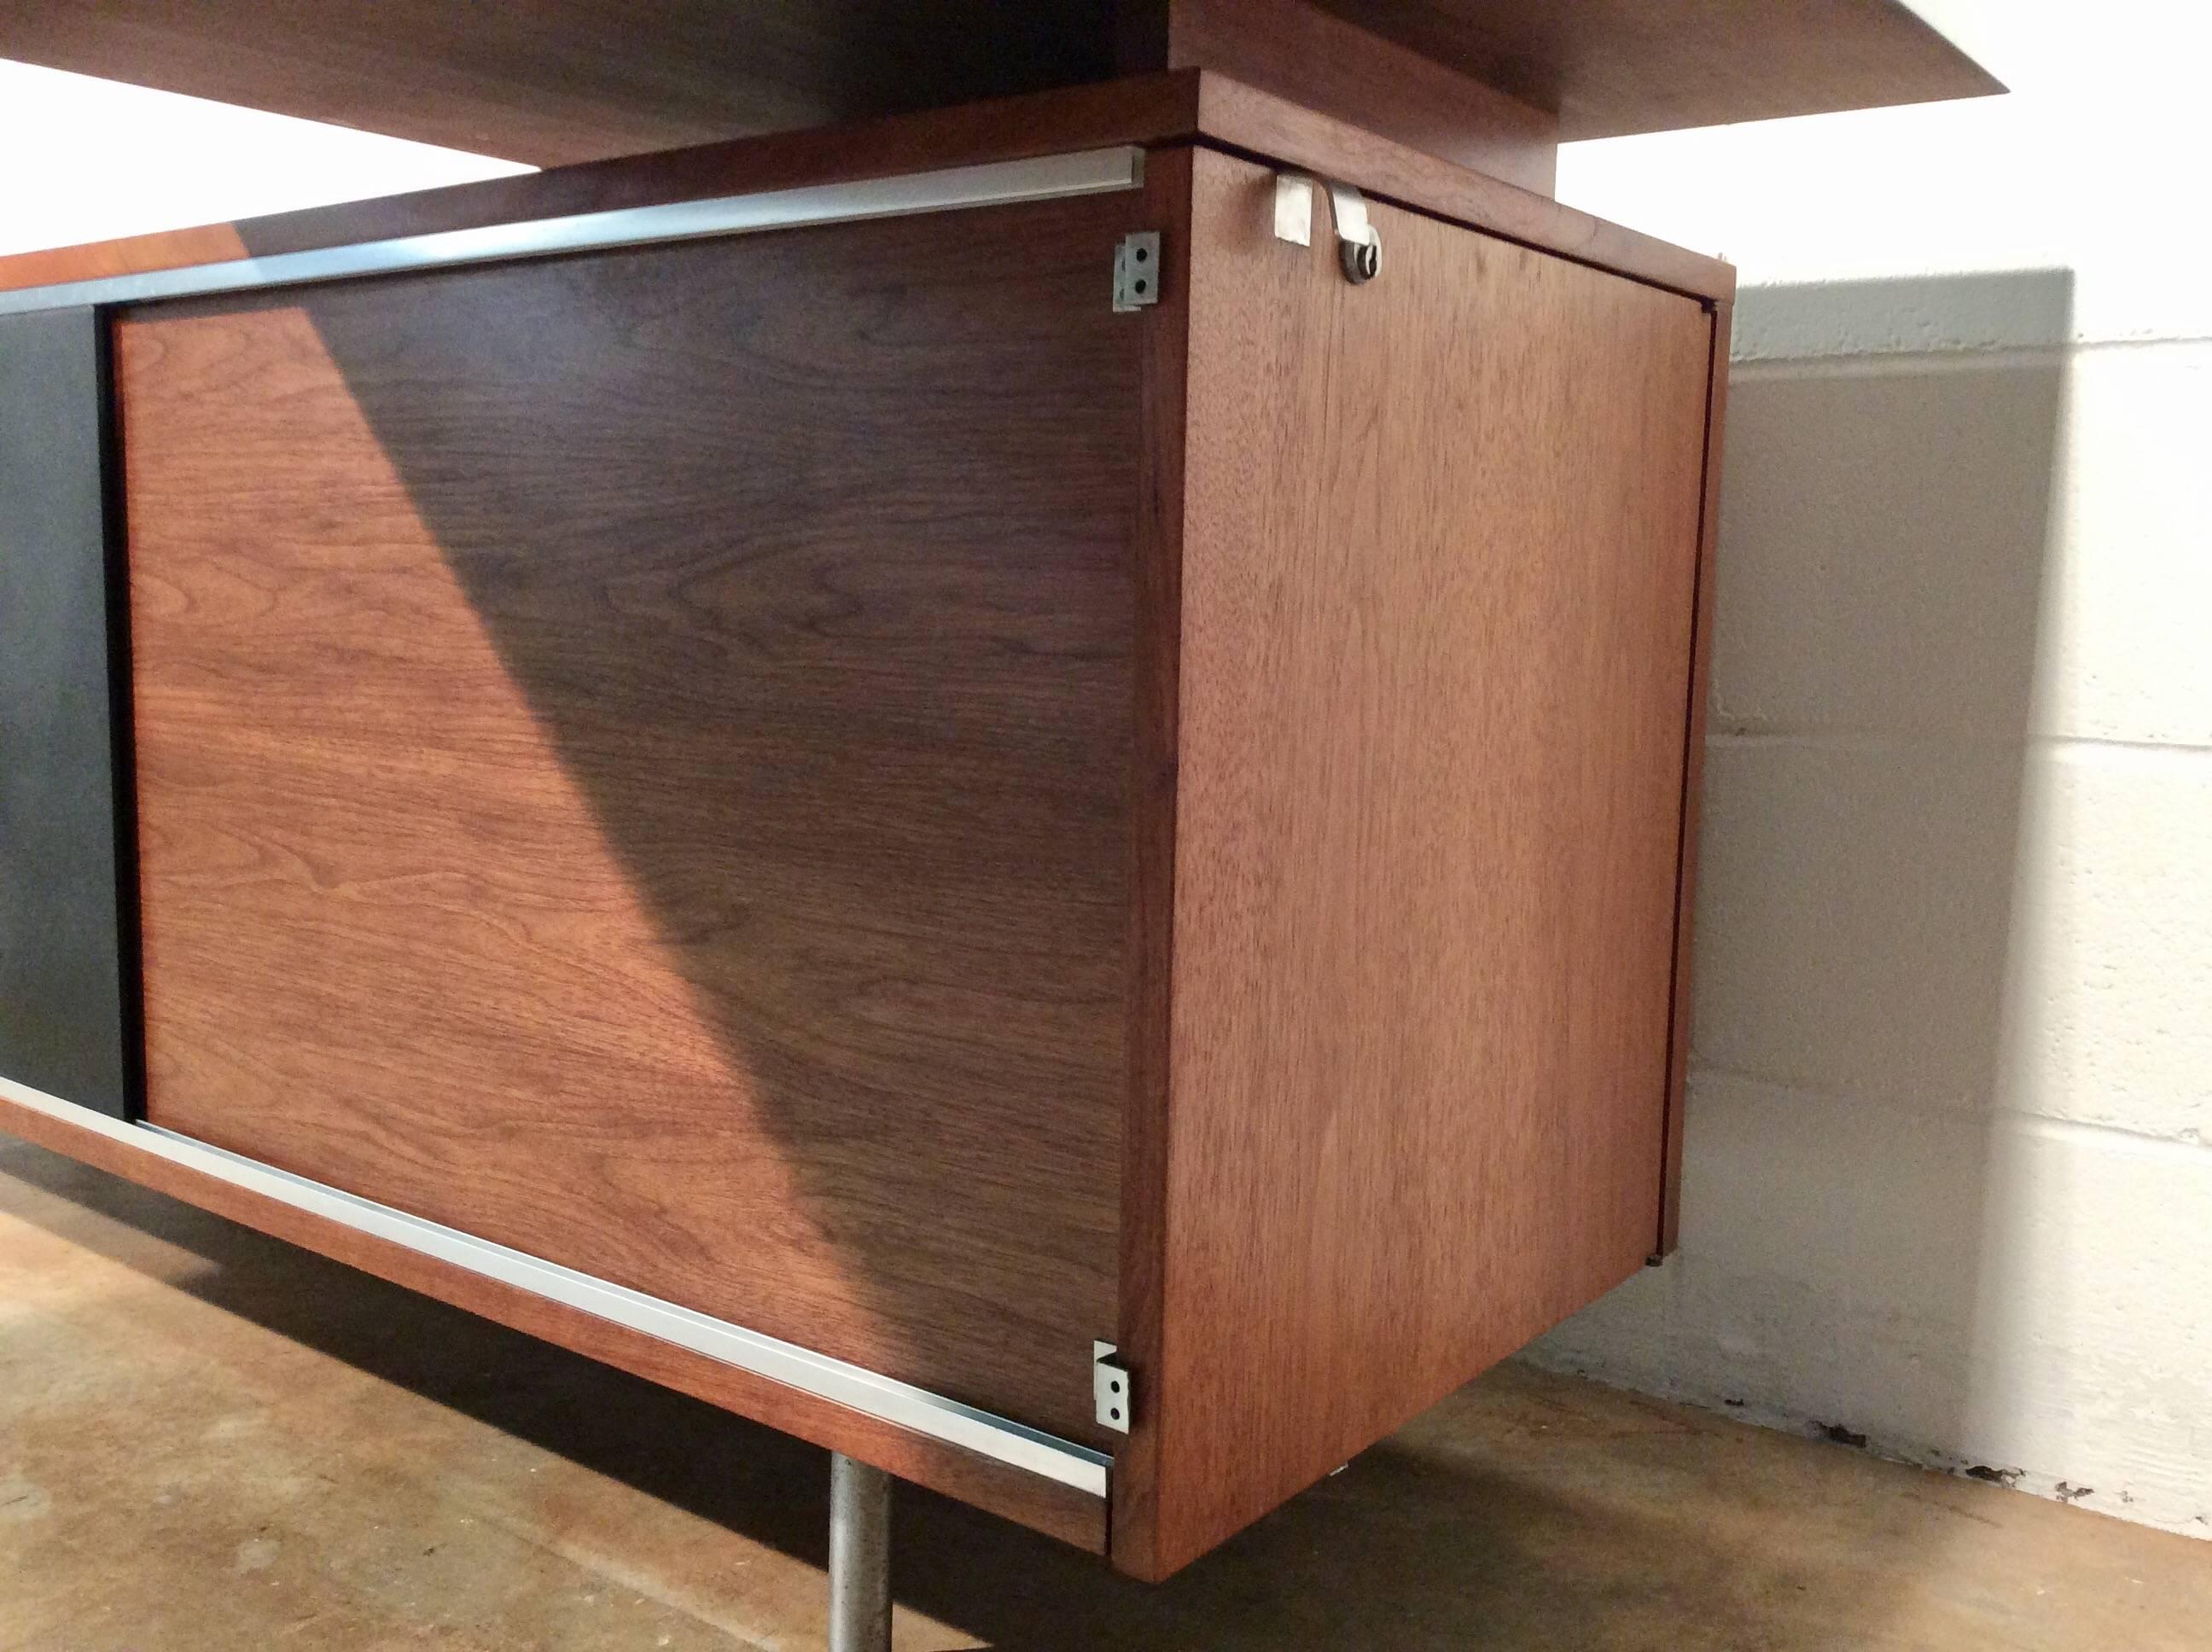 Walnut Restored Mid-Century Modern Executive Desk by George Nelson for Herman Miller